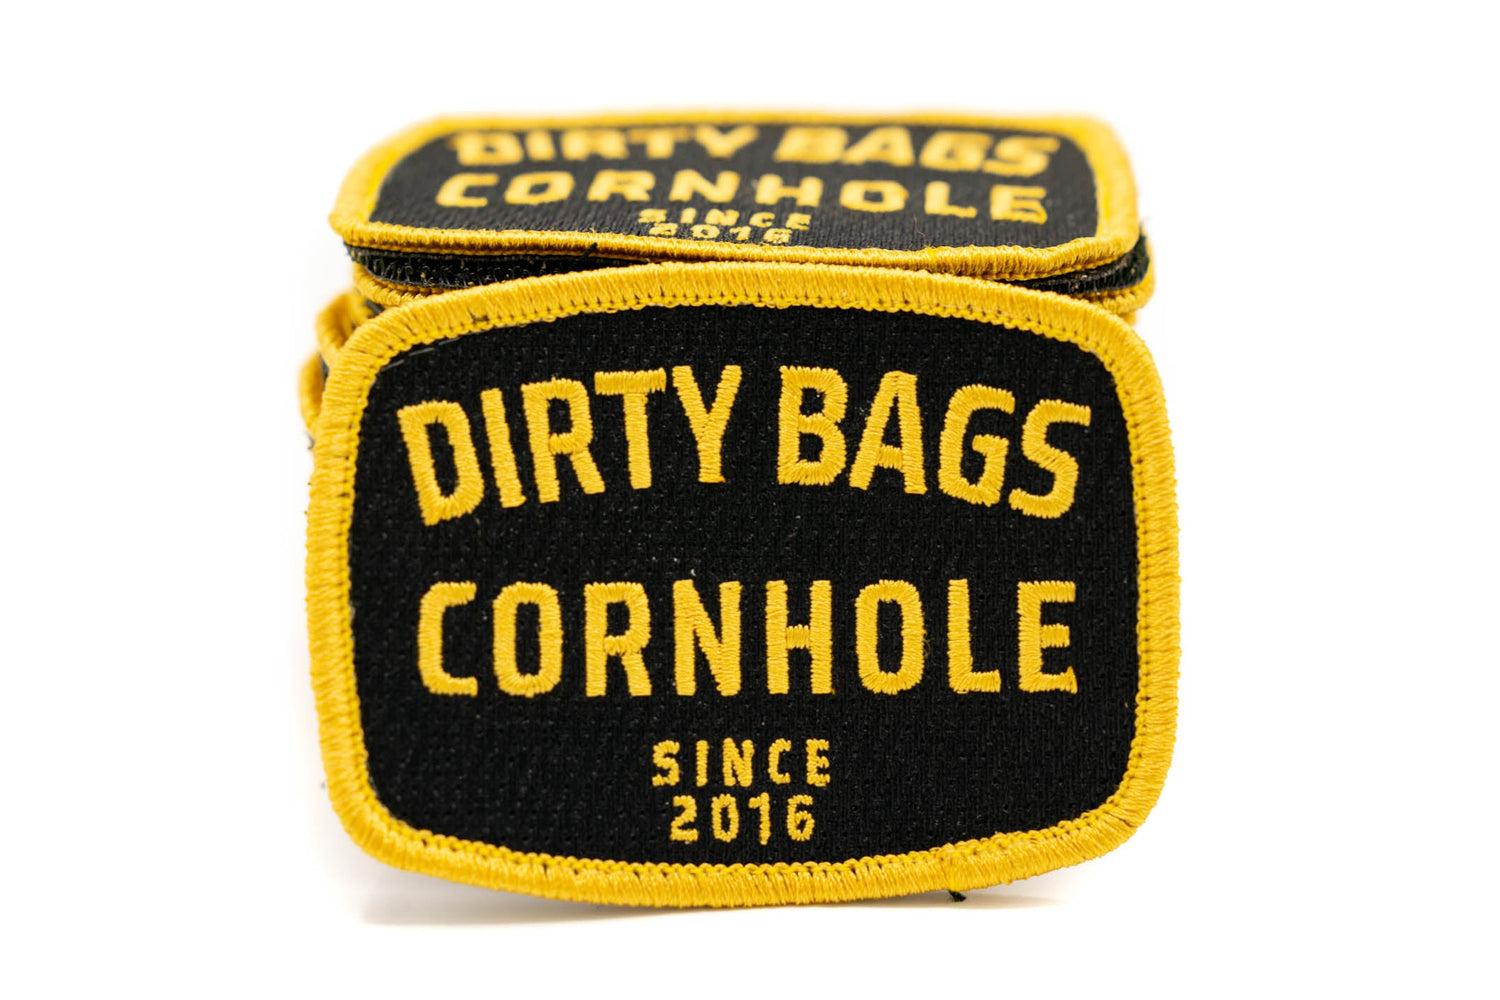 Dirty Bags Cornhole Patches